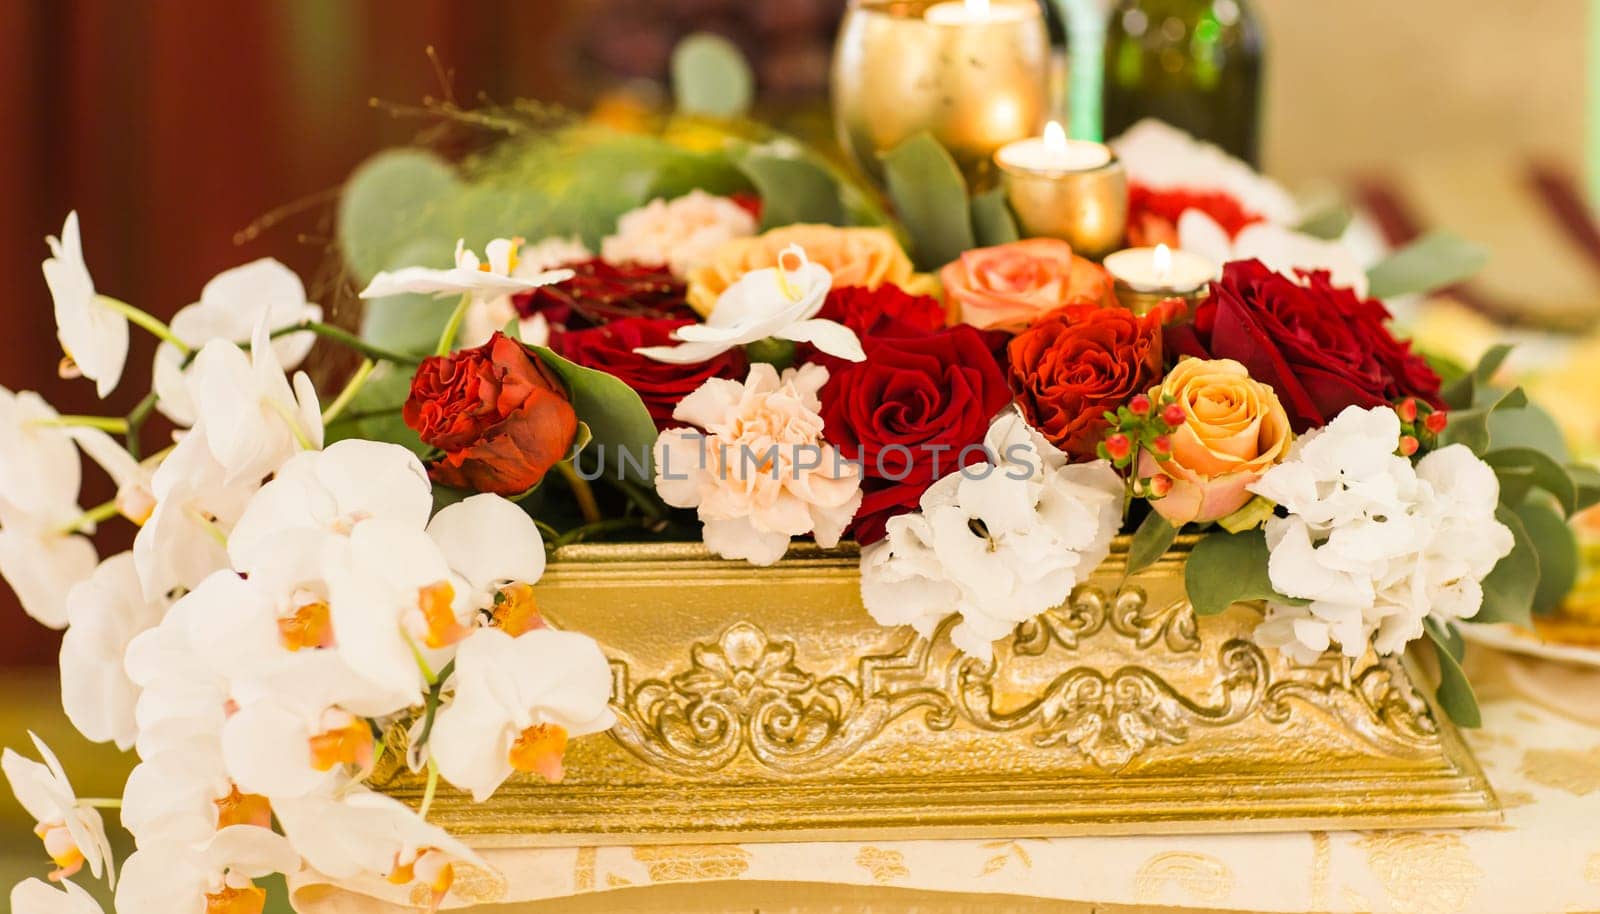 Floral decoration on festive table. by Satura86